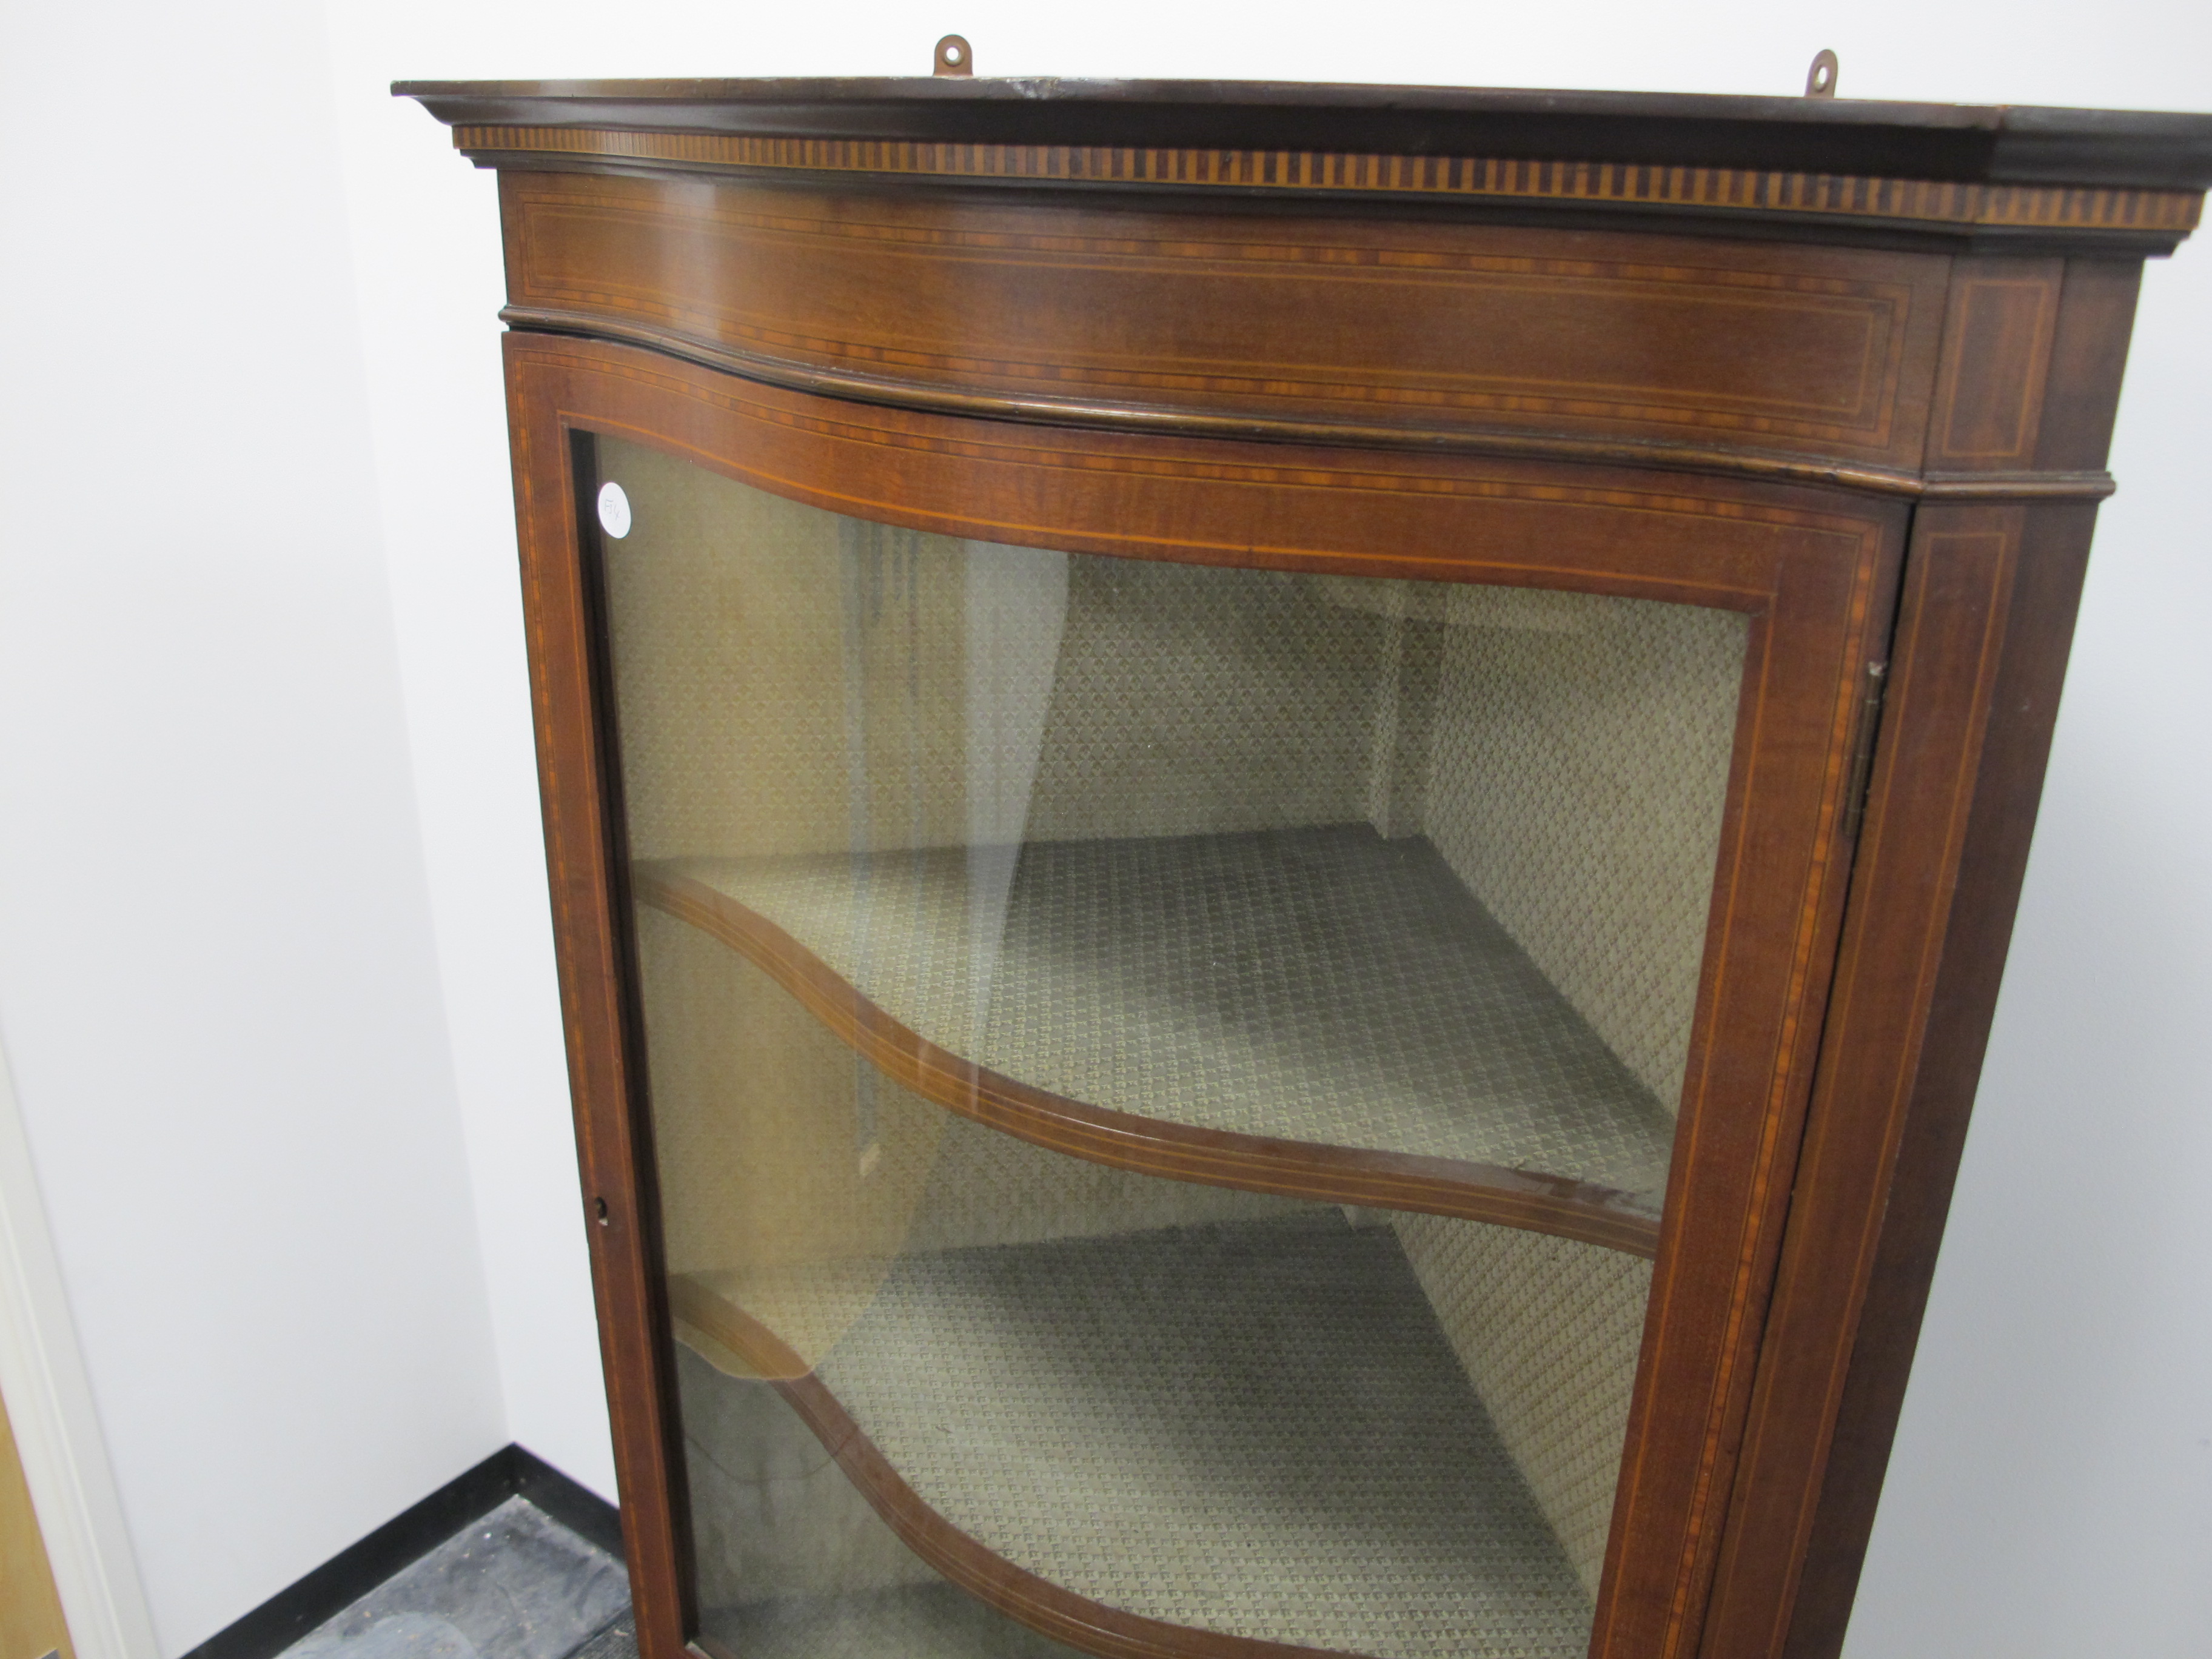 A Edwardian inlaid mahogany serpentine corner display cabinet, with cross banding and stringing, - Image 3 of 3